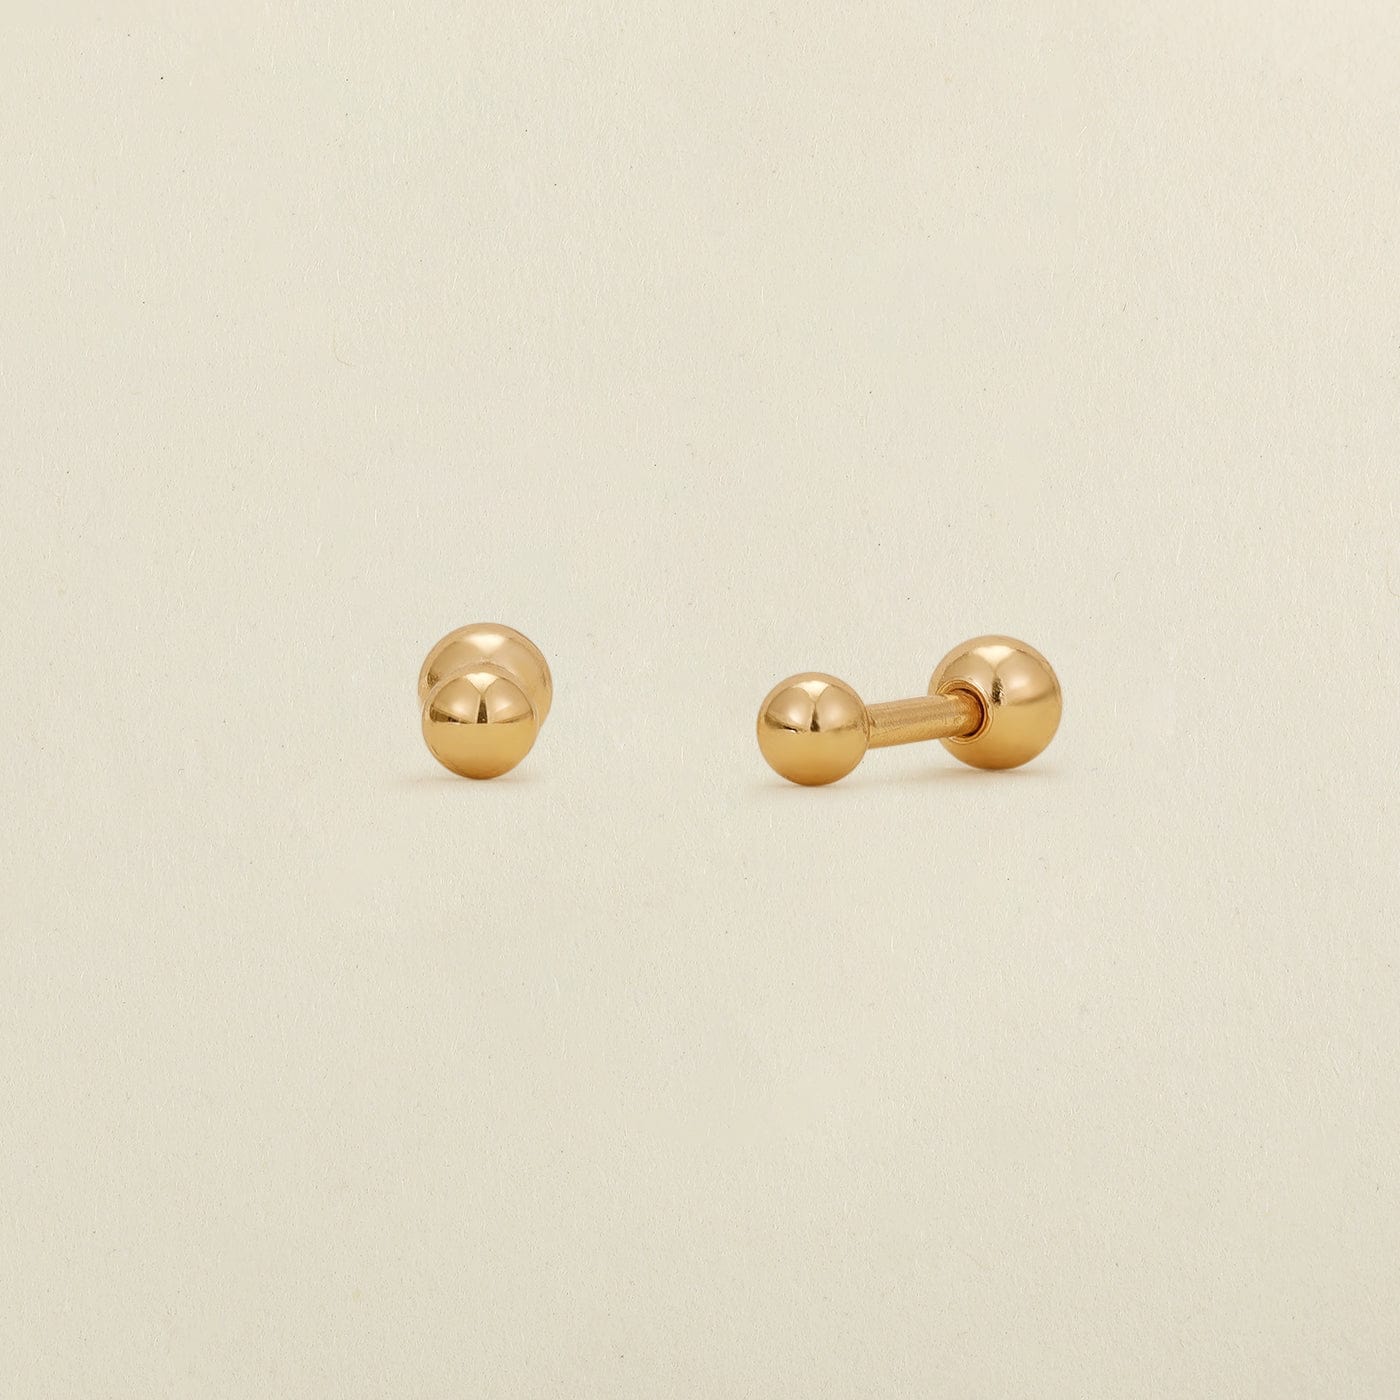 14K Gold Earring Backs - 4 Piece Replacement Earring Backs for Stud Ear  Rings 2 Pairs